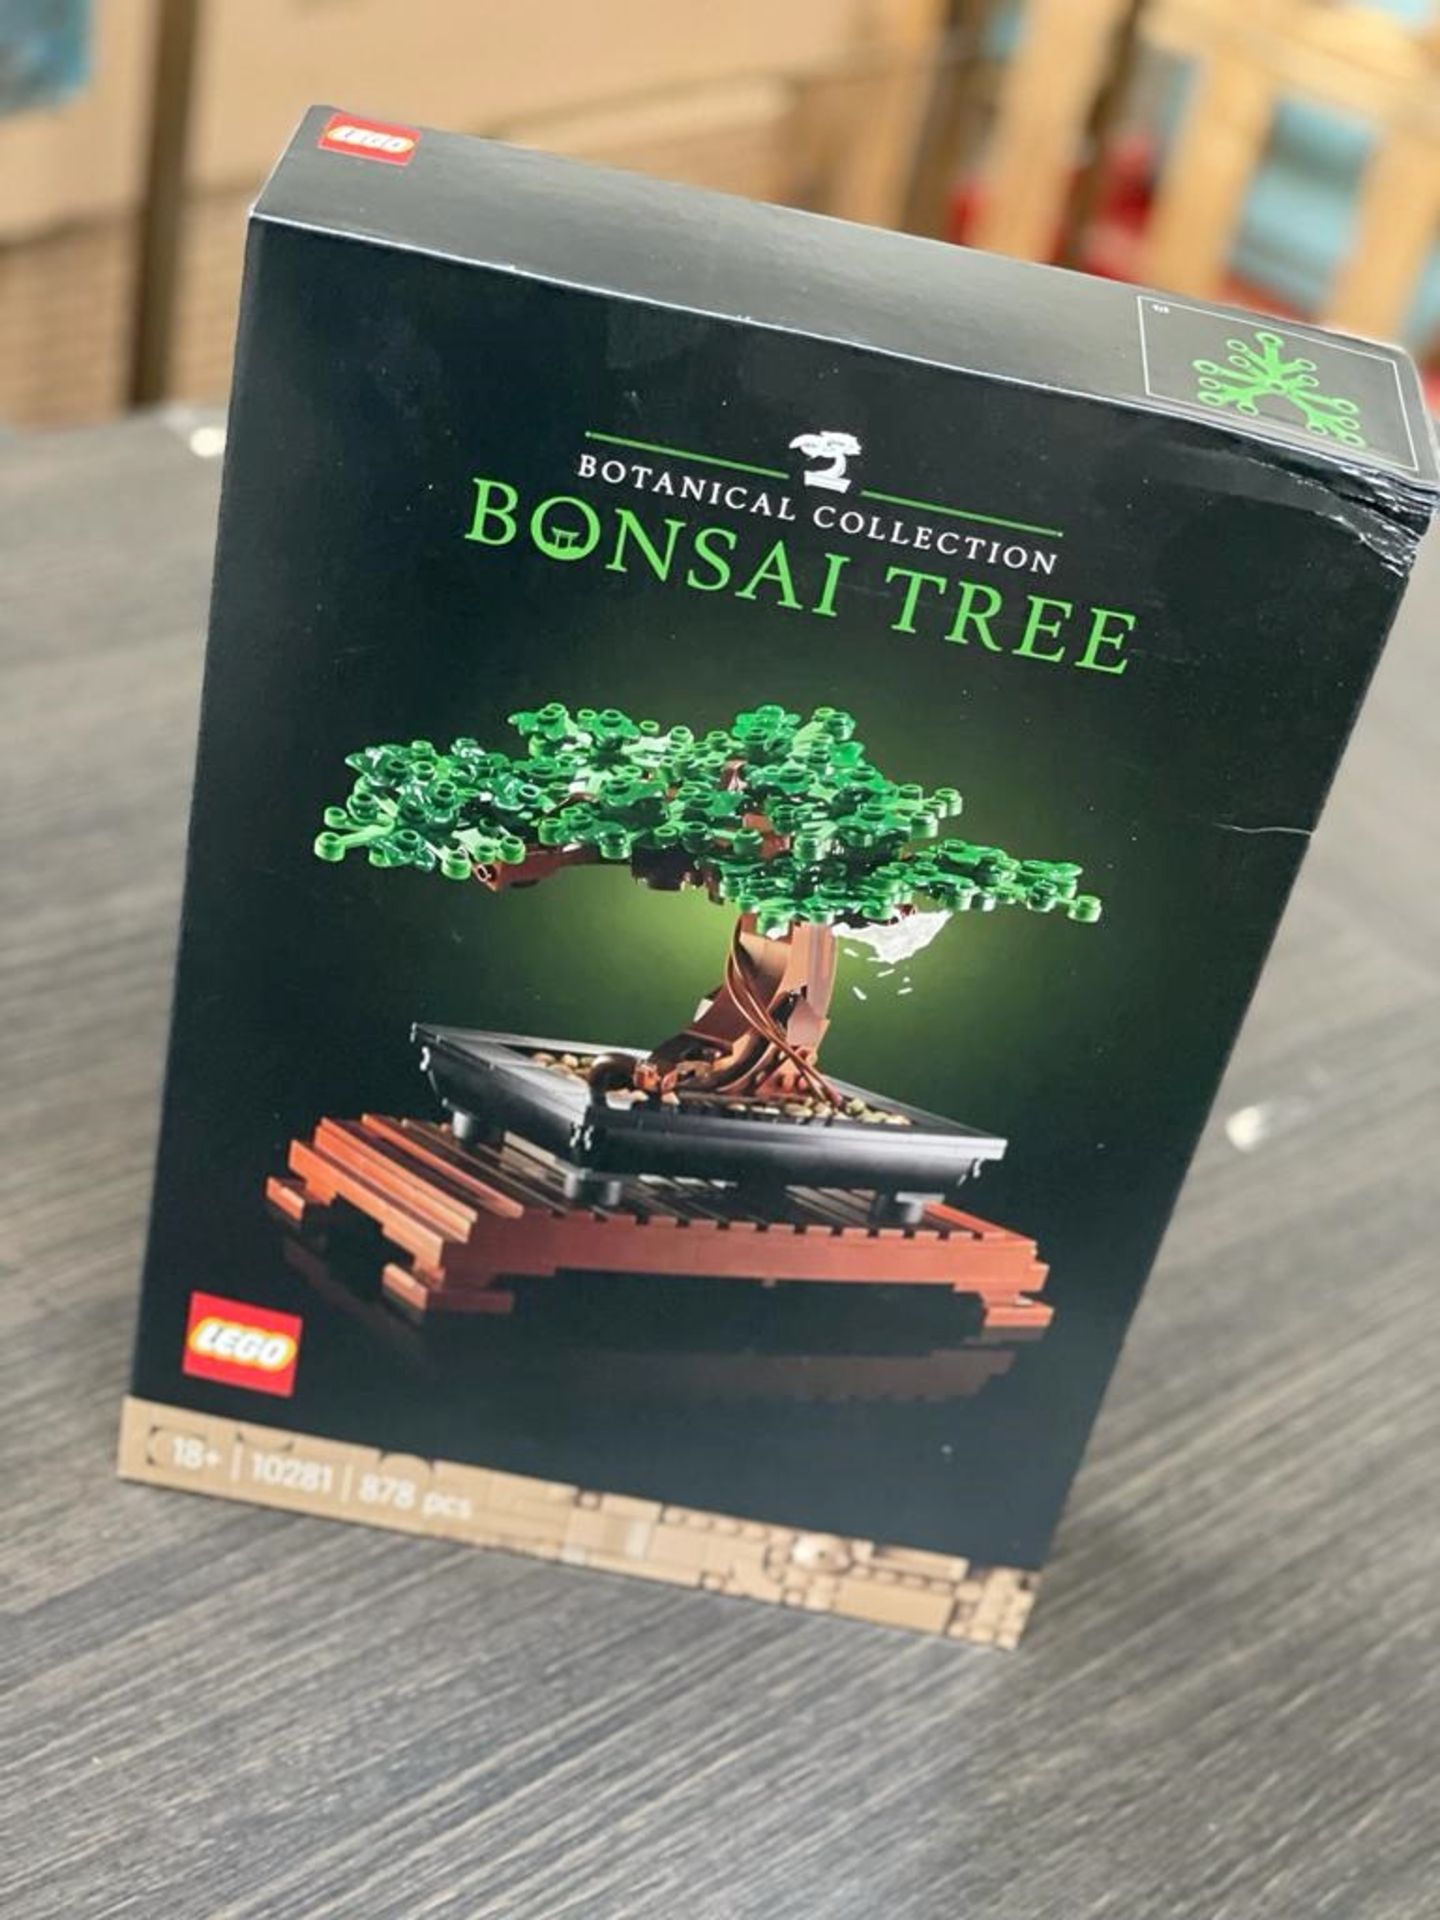 1 x Lego Botanical Collection Bonsai Tree 878 Pieces 18+ (10281) - Brand New - CL987 - Ref: - Image 4 of 5